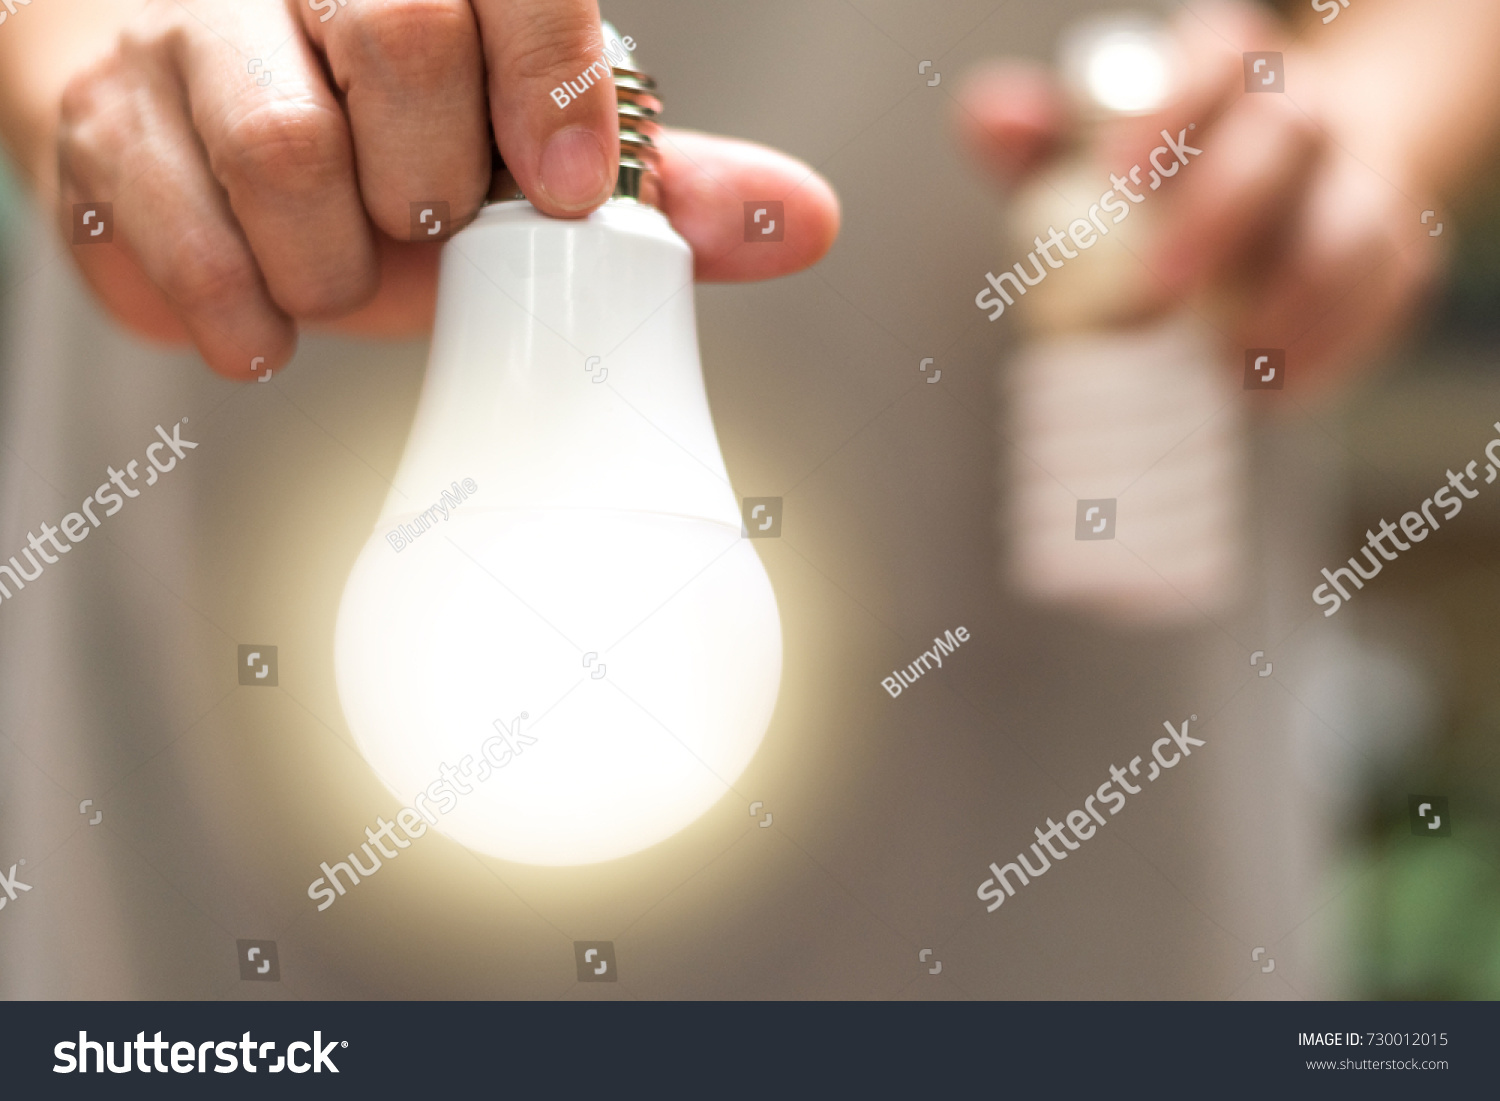 Power saving concept. Hands holding  new  Light Emitting Diode ( LED ) light bulb with light on and blur spiral compact-fluorescent (CFL) bulbs behind for copyspace. #730012015